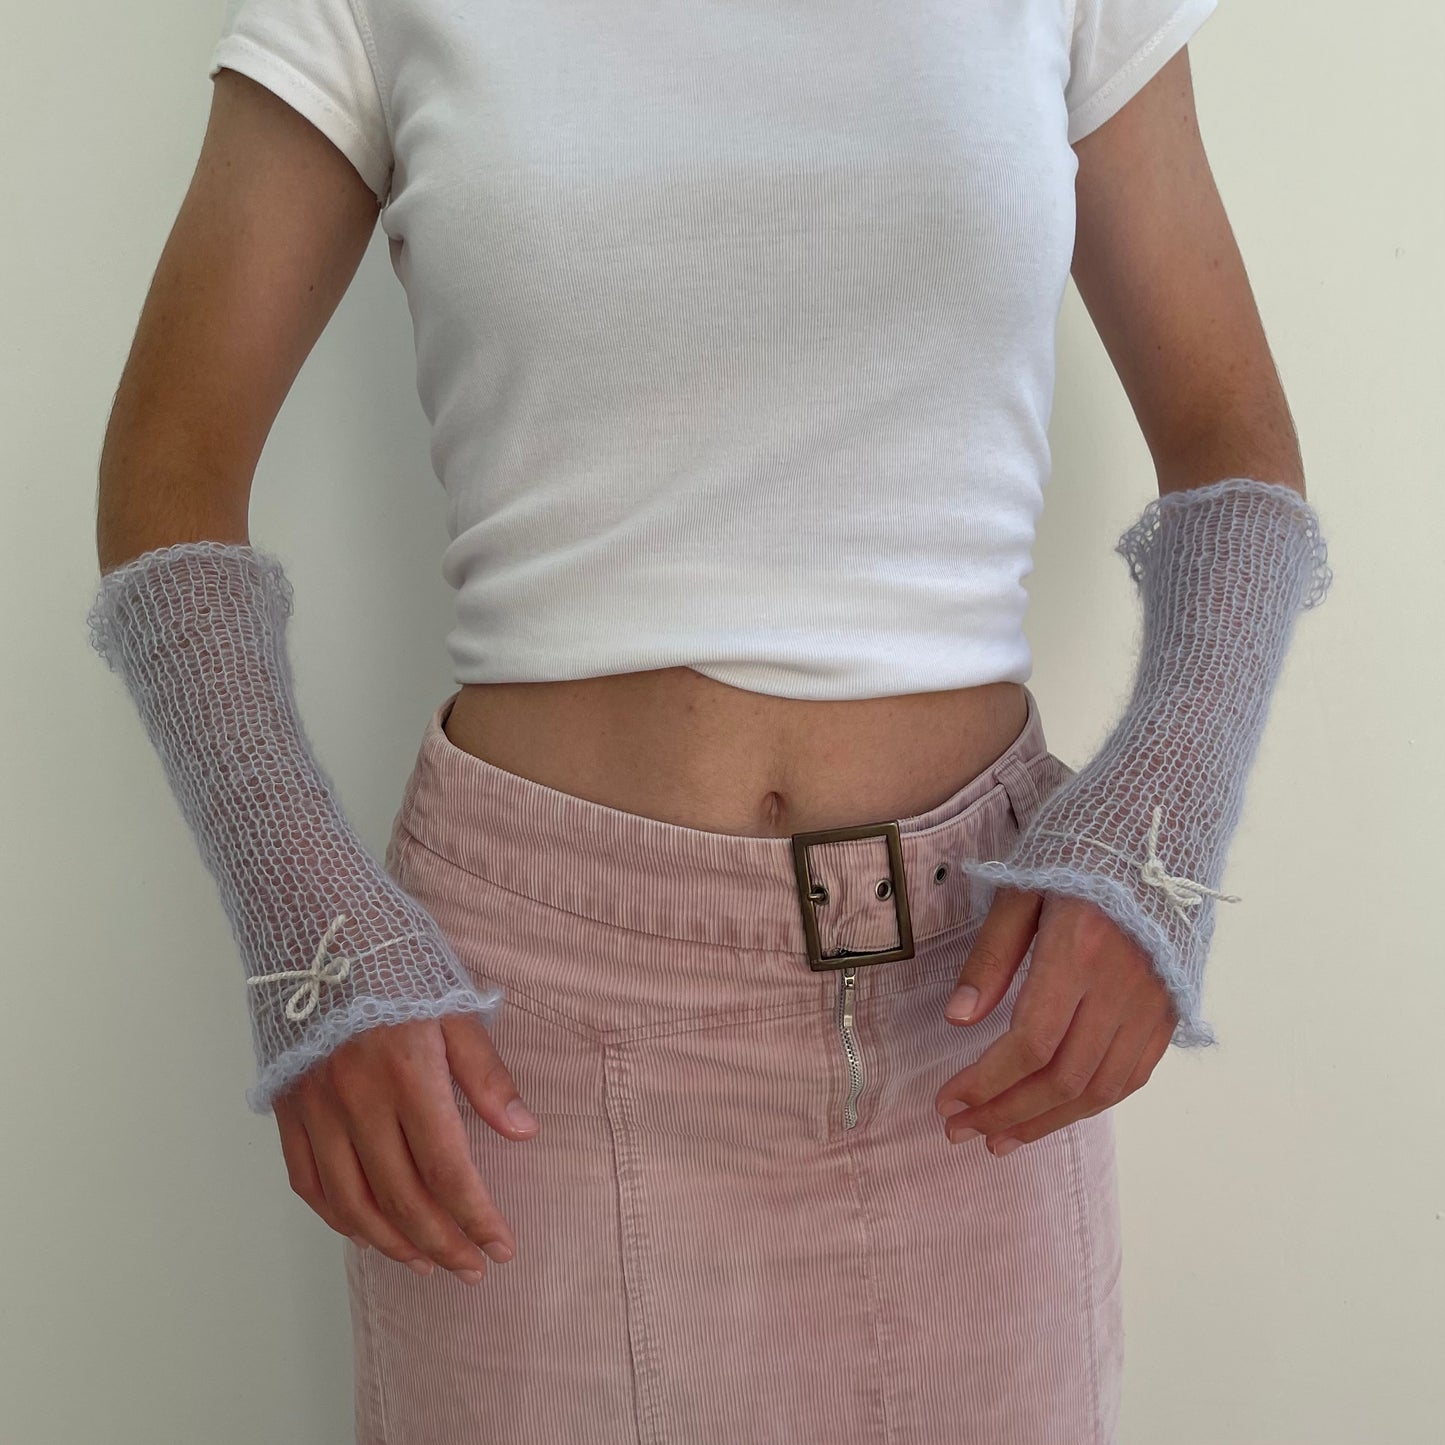 Handmade knitted mohair hand warmers in baby blue with beige bow